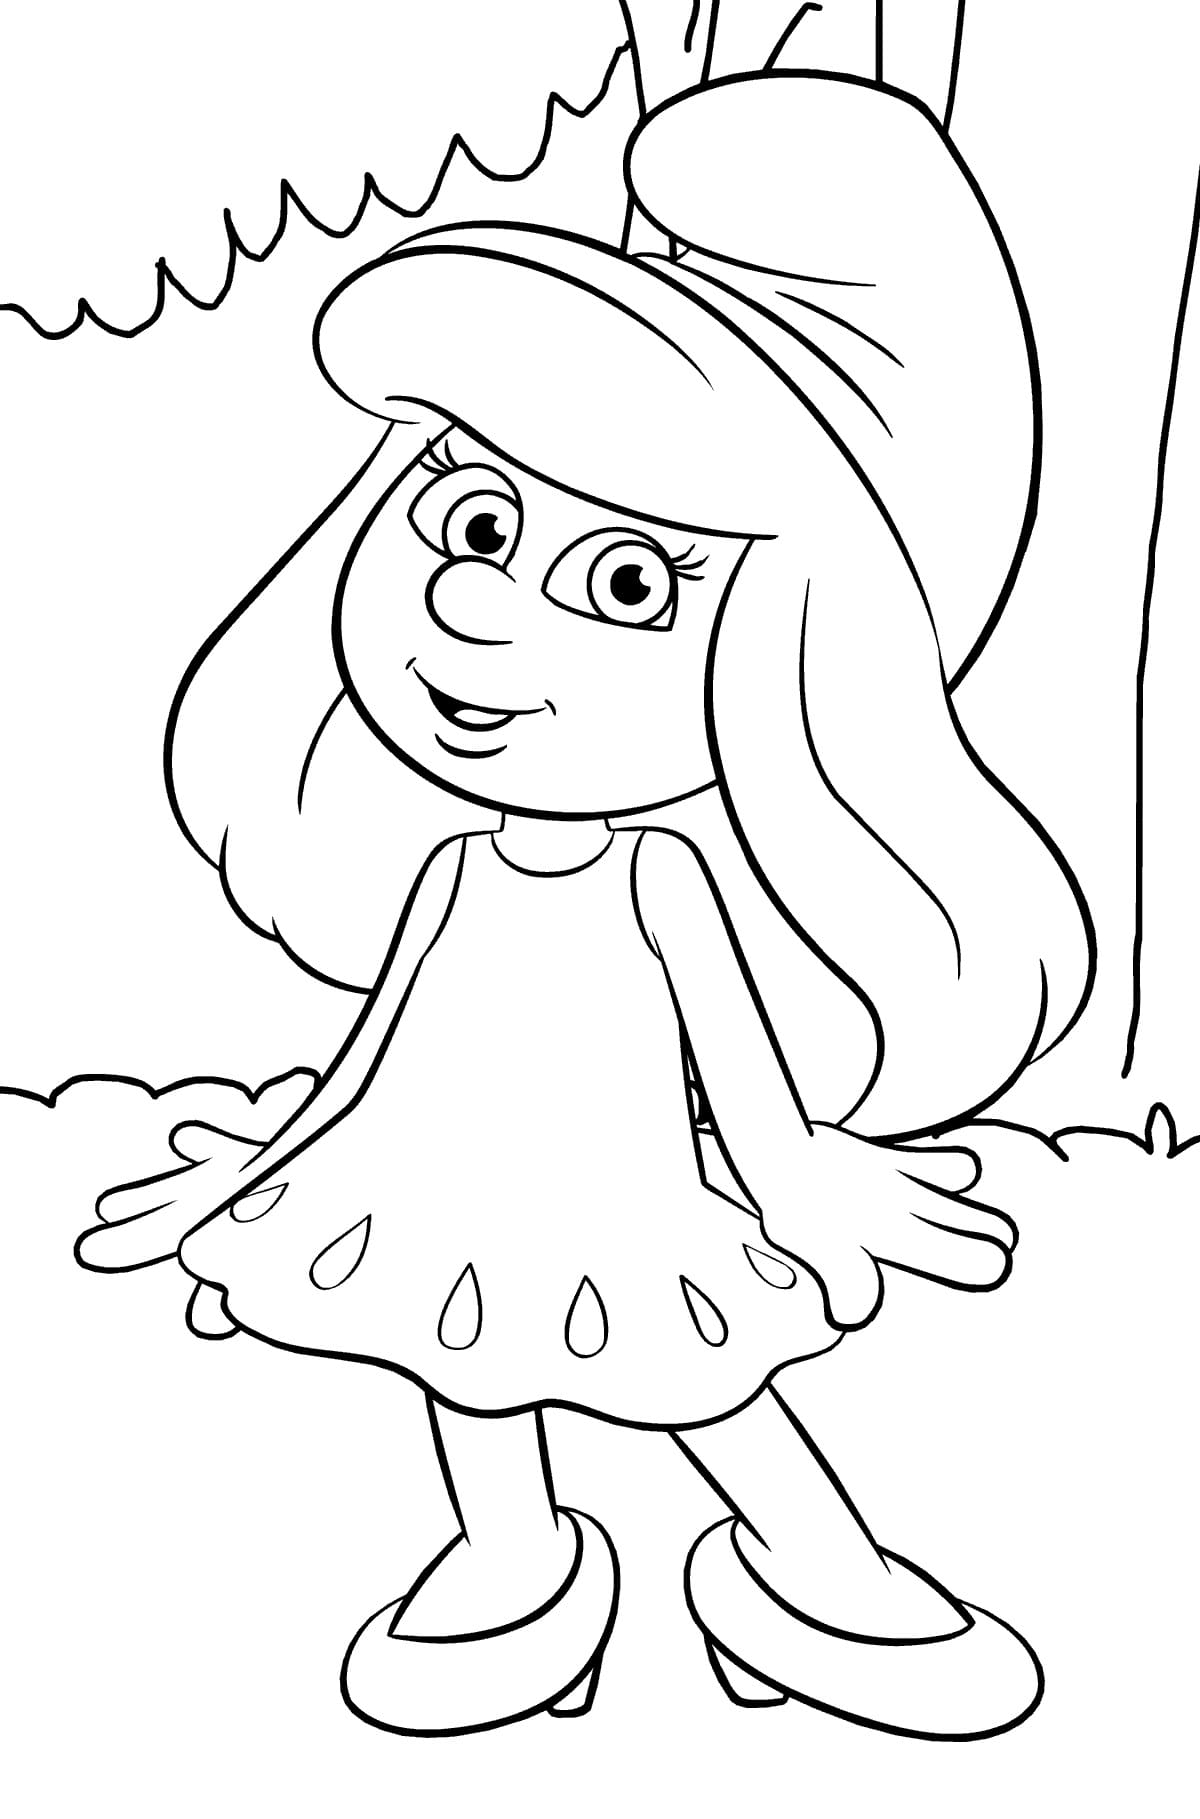 The Smurfs Coloring Pages | 80 images Free Printable